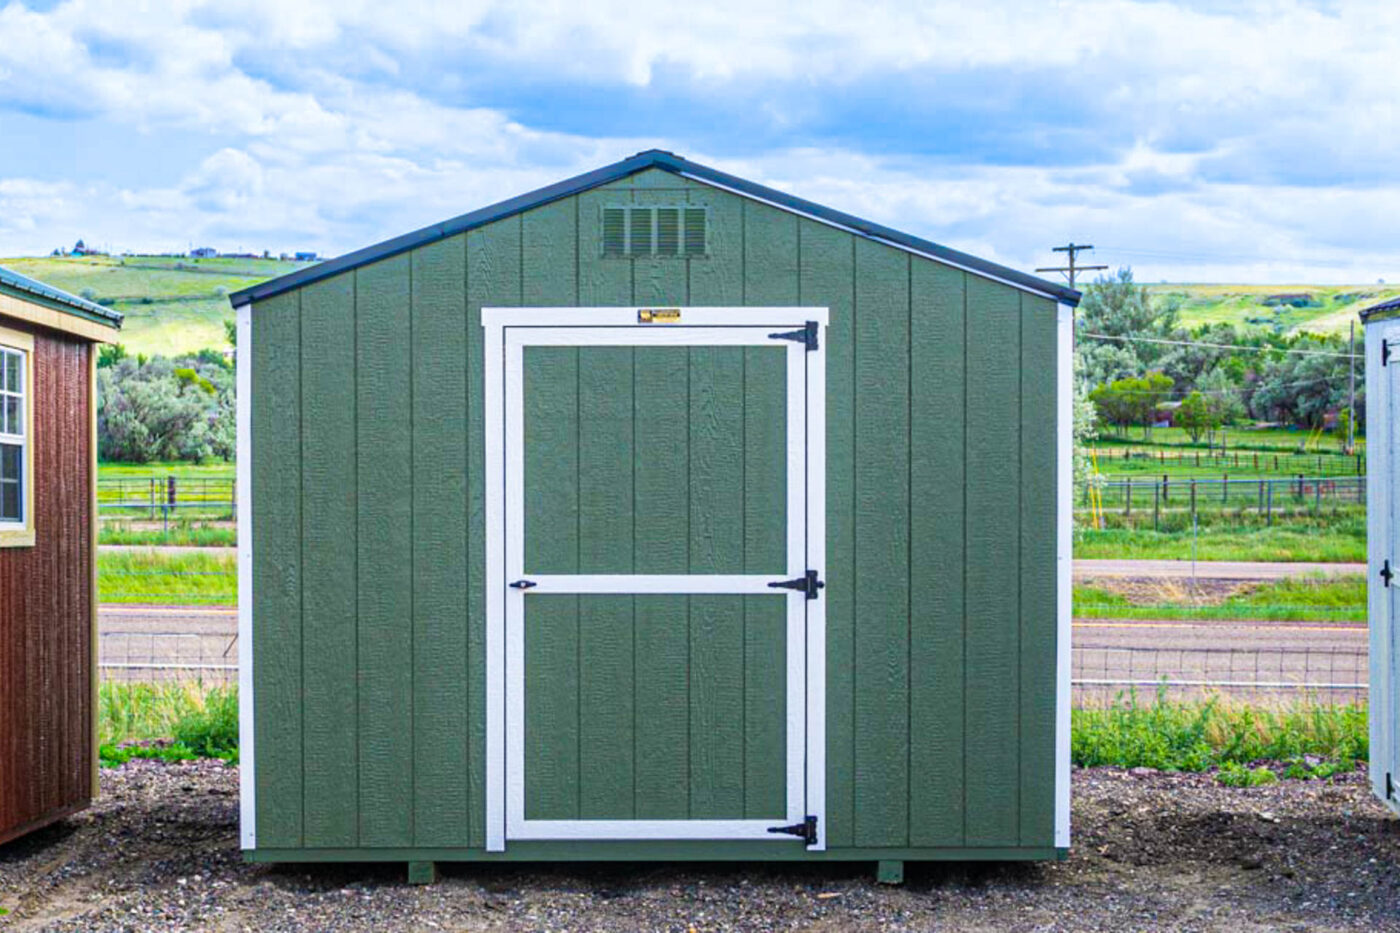 storage sheds for sale in panedale, wy